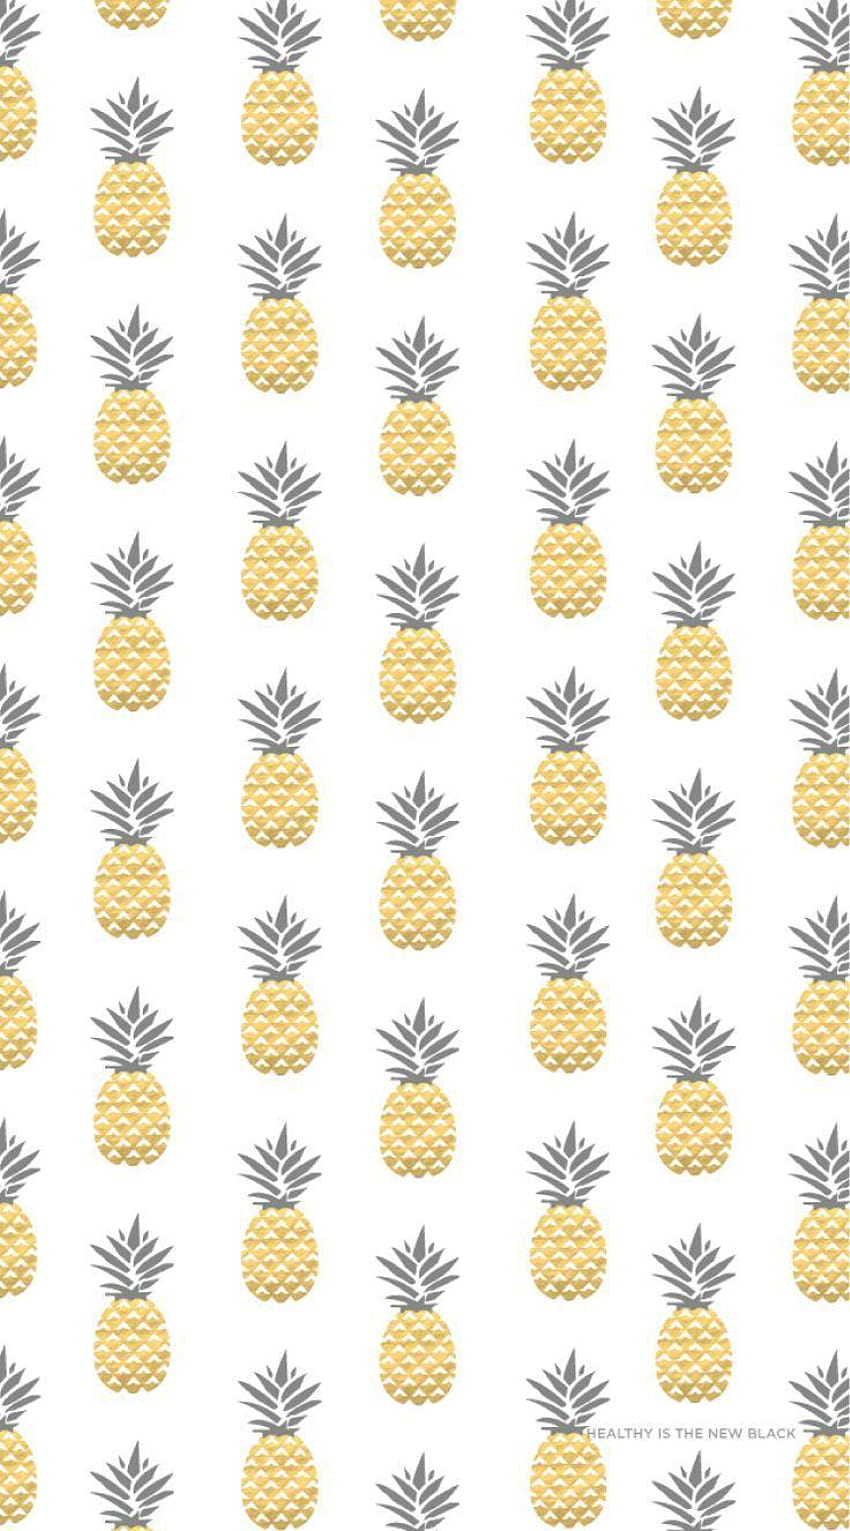 Gold Pineapples iphone . Healthy lifestyle HD phone wallpaper